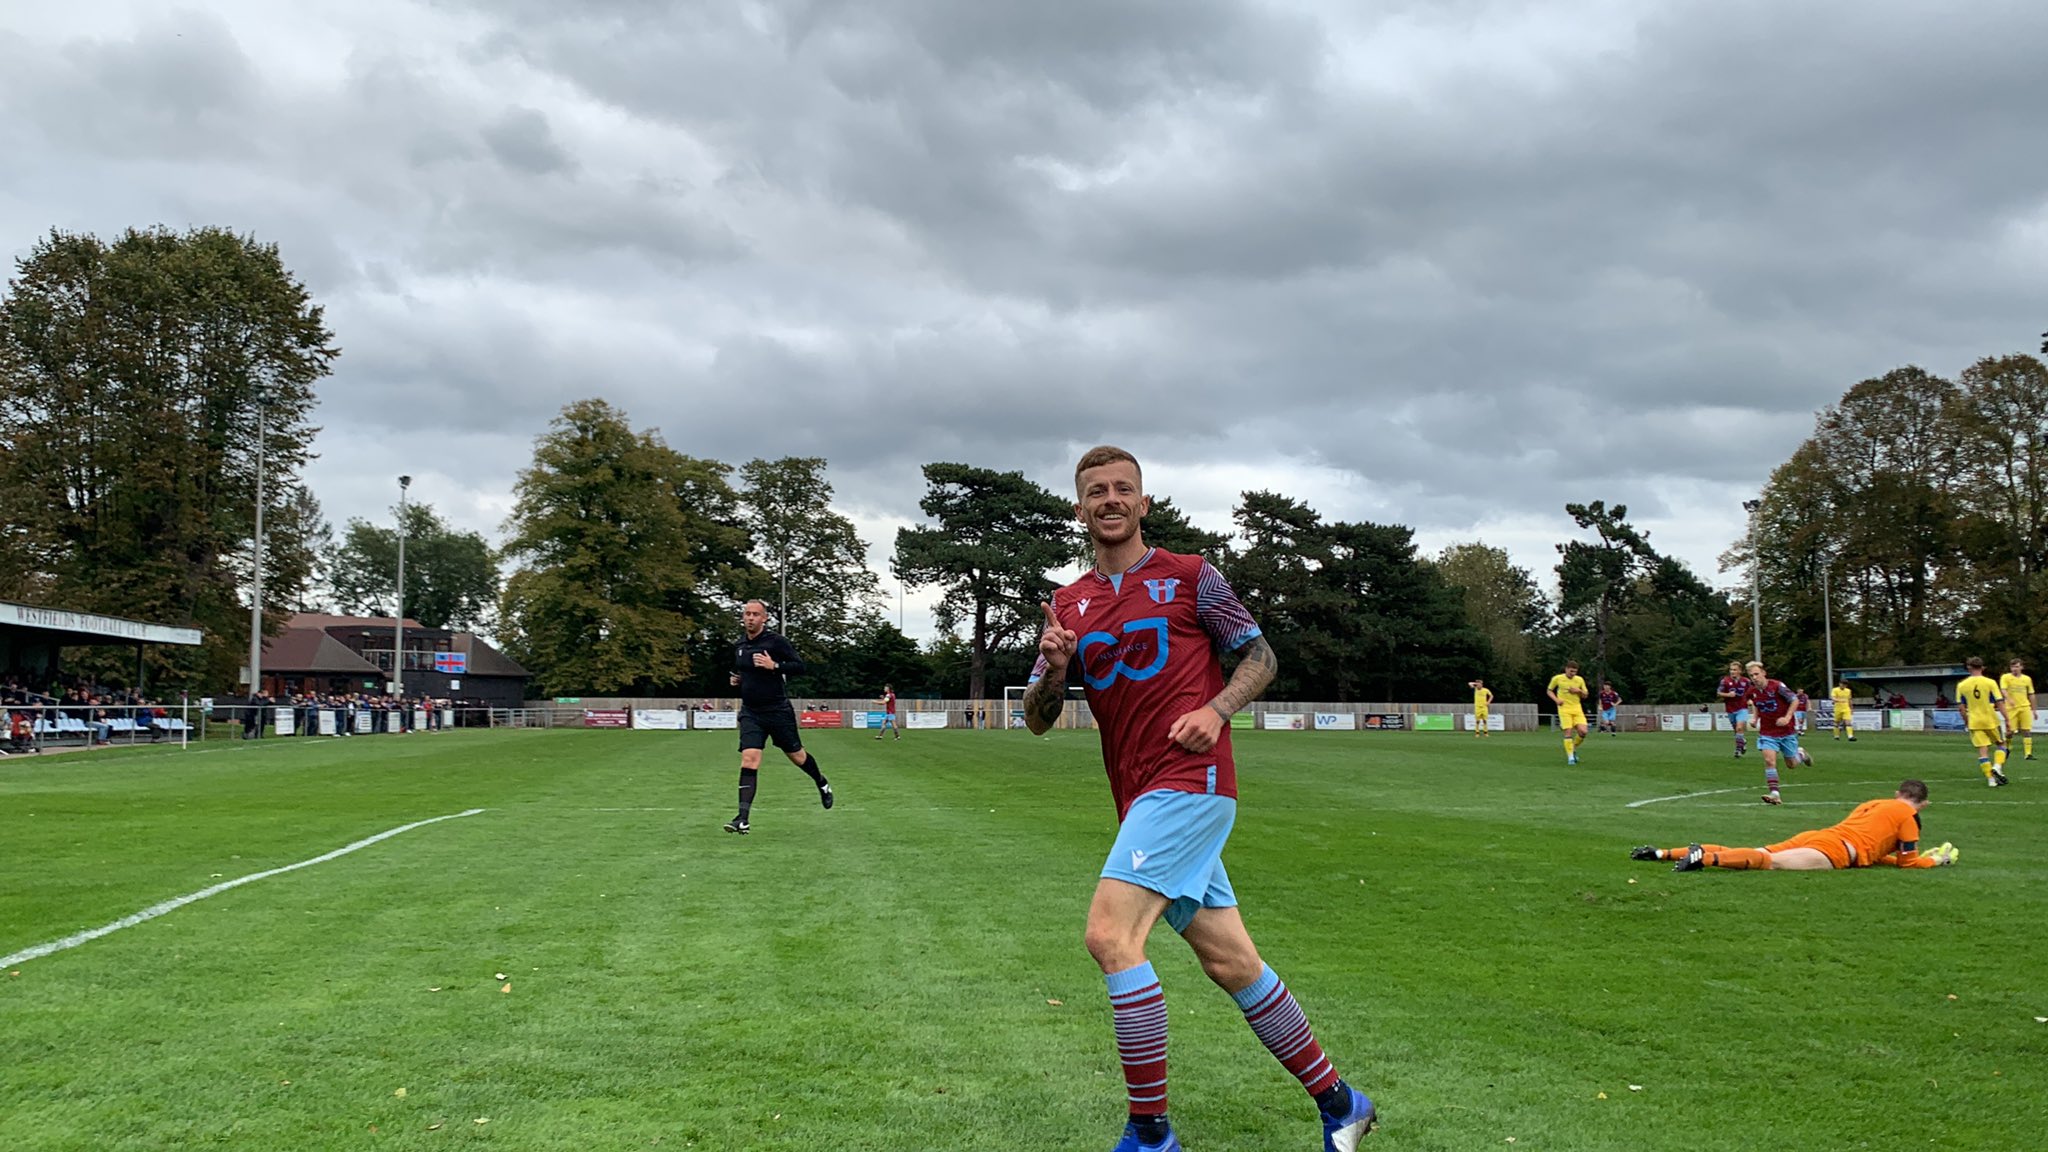 FOOTBALL | Man of the match performance by Matt MacDonald drives Westfields to 3-0 home victory over Calne Town